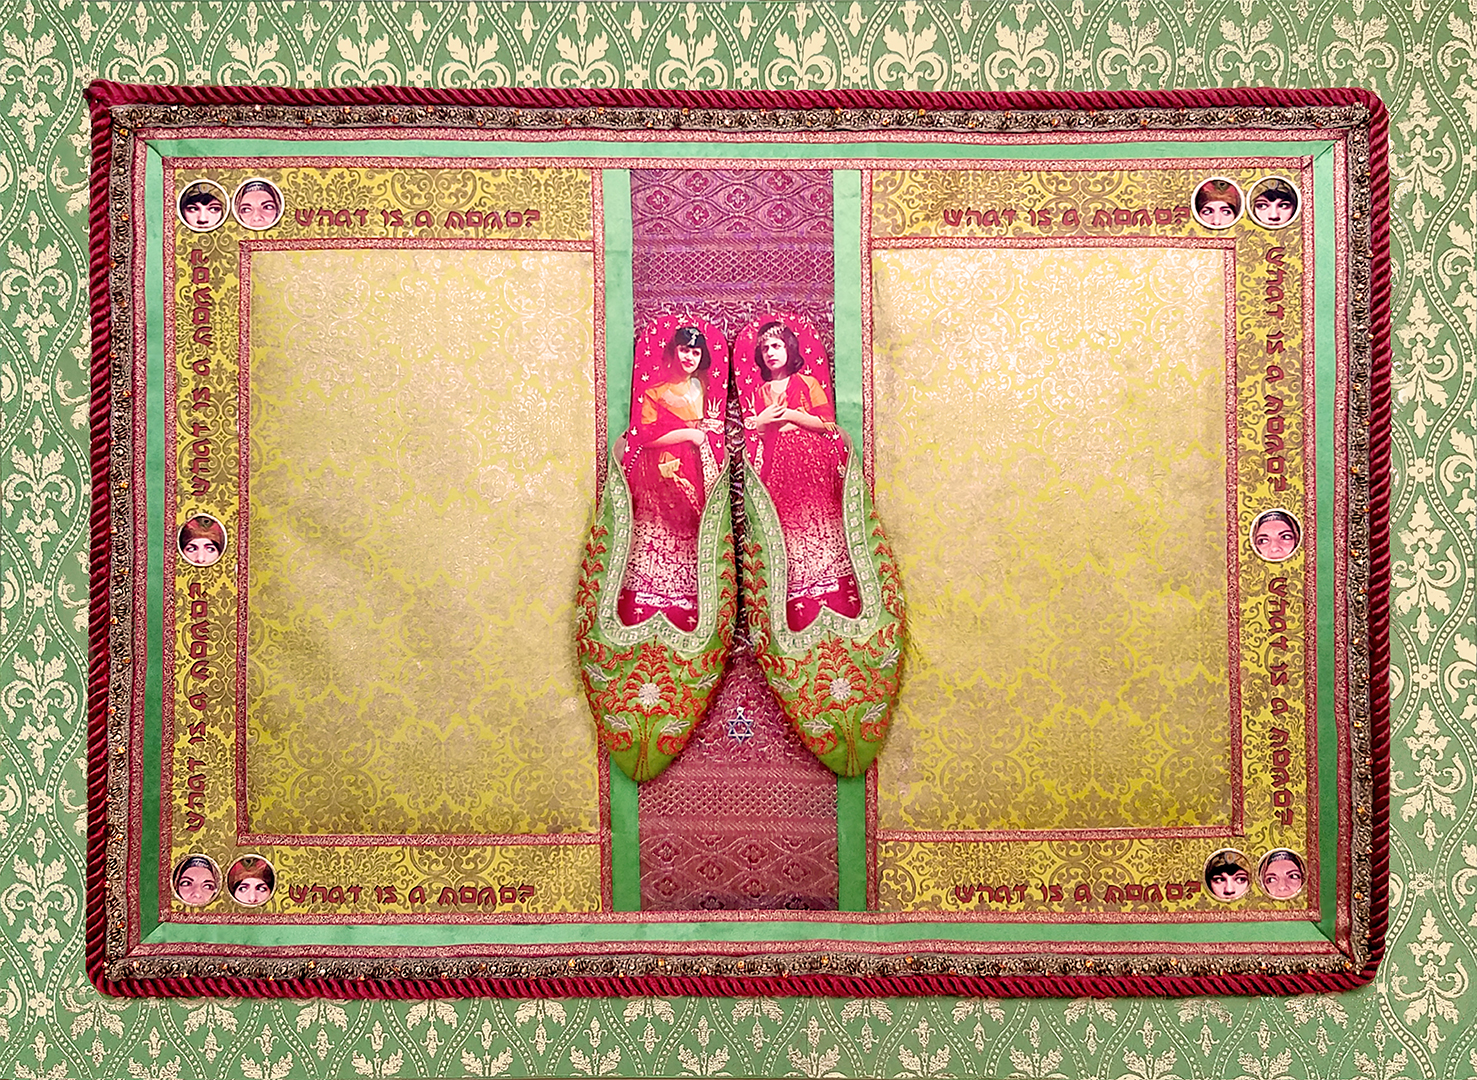 wall piece with patterened silk and slippers mounted in the middle. the outer most area is green silk with a floral pattern, then inside is a rose pink cord around it. the center background is a golden floral pattern, in the center behind the slipper is a vertical green and rose gold thick stripe pattern decoration. two photographic images young girls are cut in circular shape decorate each of the four corners of the golden floral background. the outside of the slipper has a green background with rose pink floral emboridery. inside of the slipper is rose pink background with two photographic image of two women in rose pink dresses.